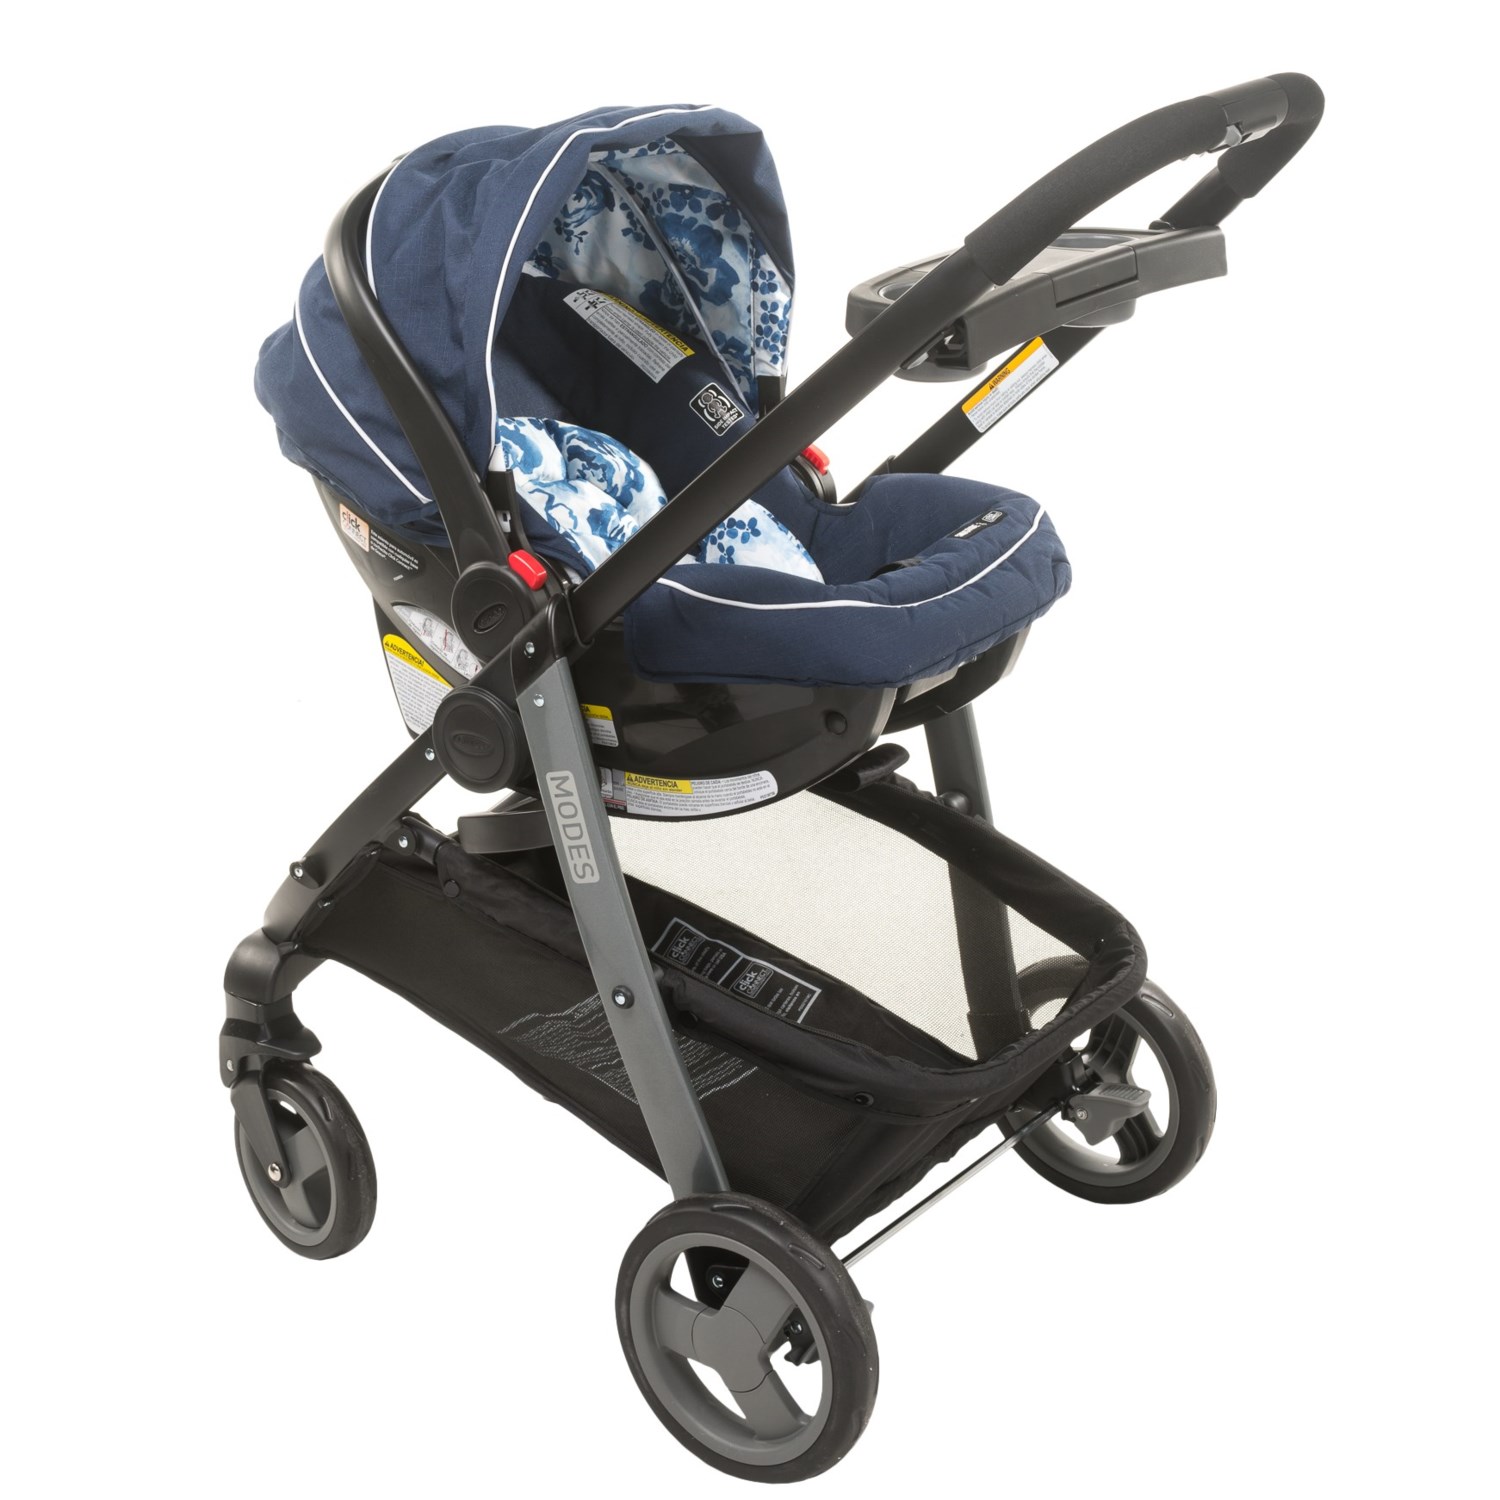 Graco Modes 3-in-1 Travel System with SnugRide35 Car Seat - Save 35%